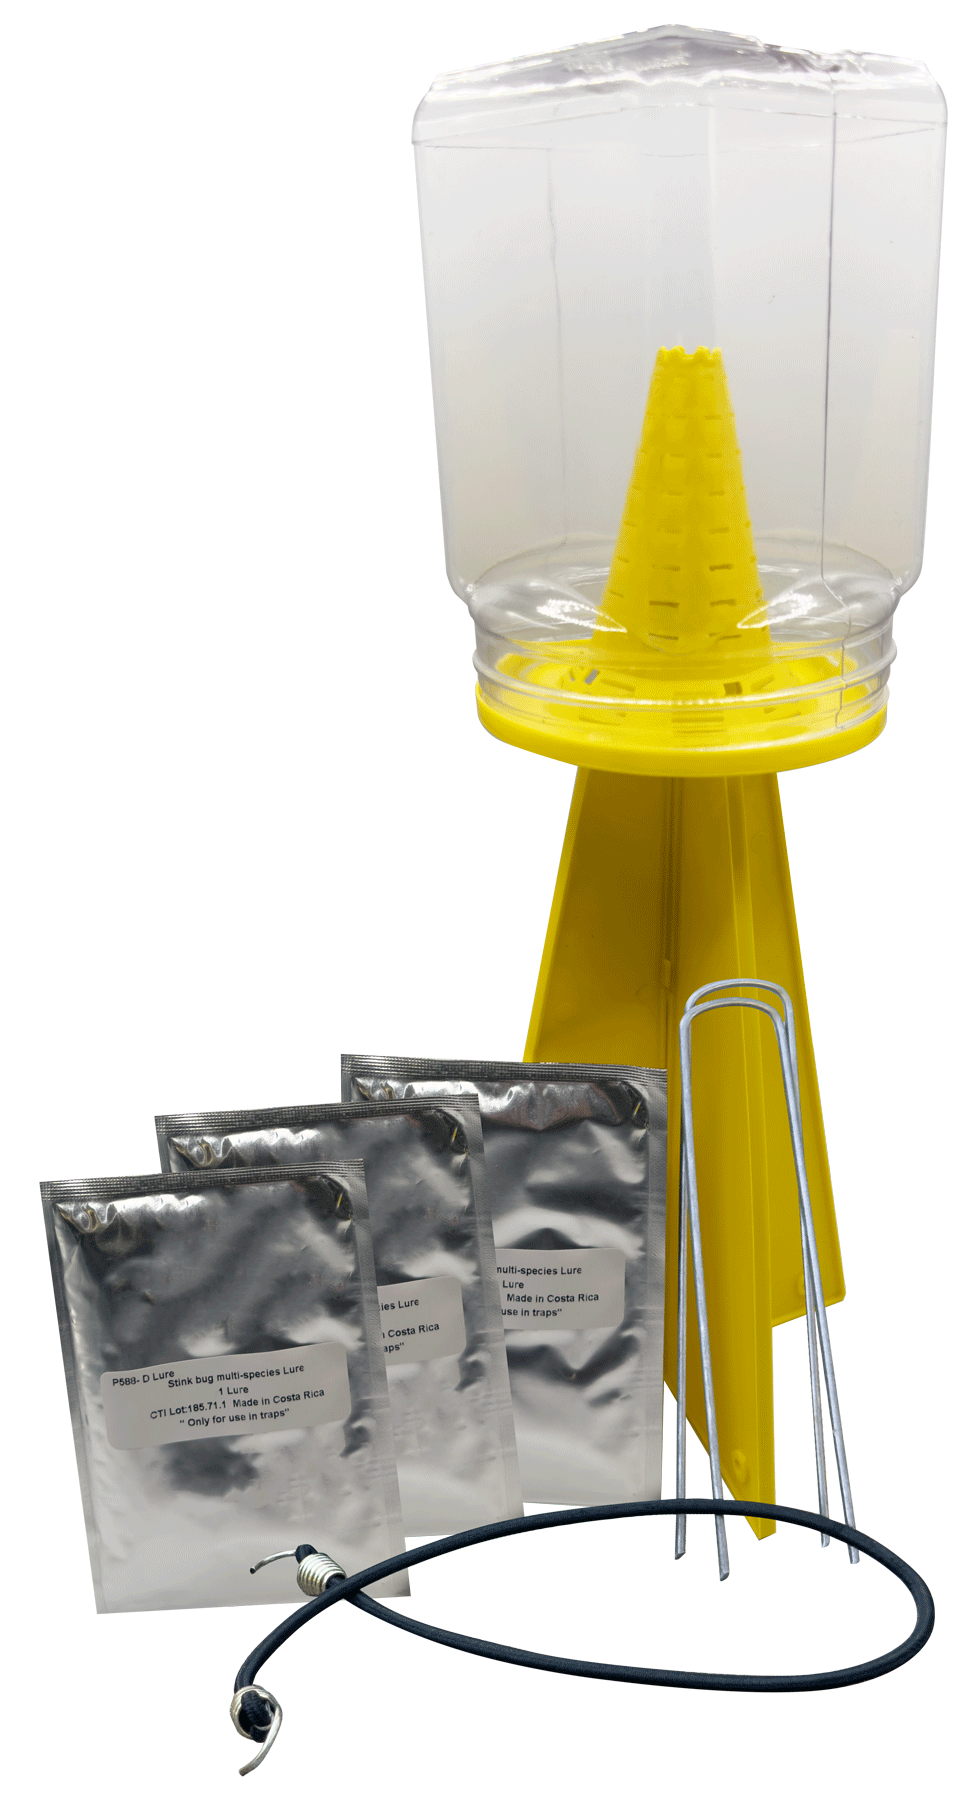 RESCUE! 0.51-lb Light (Accessory) for Stink Bug Trap - Indoor Use in the  Animal & Rodent Control department at